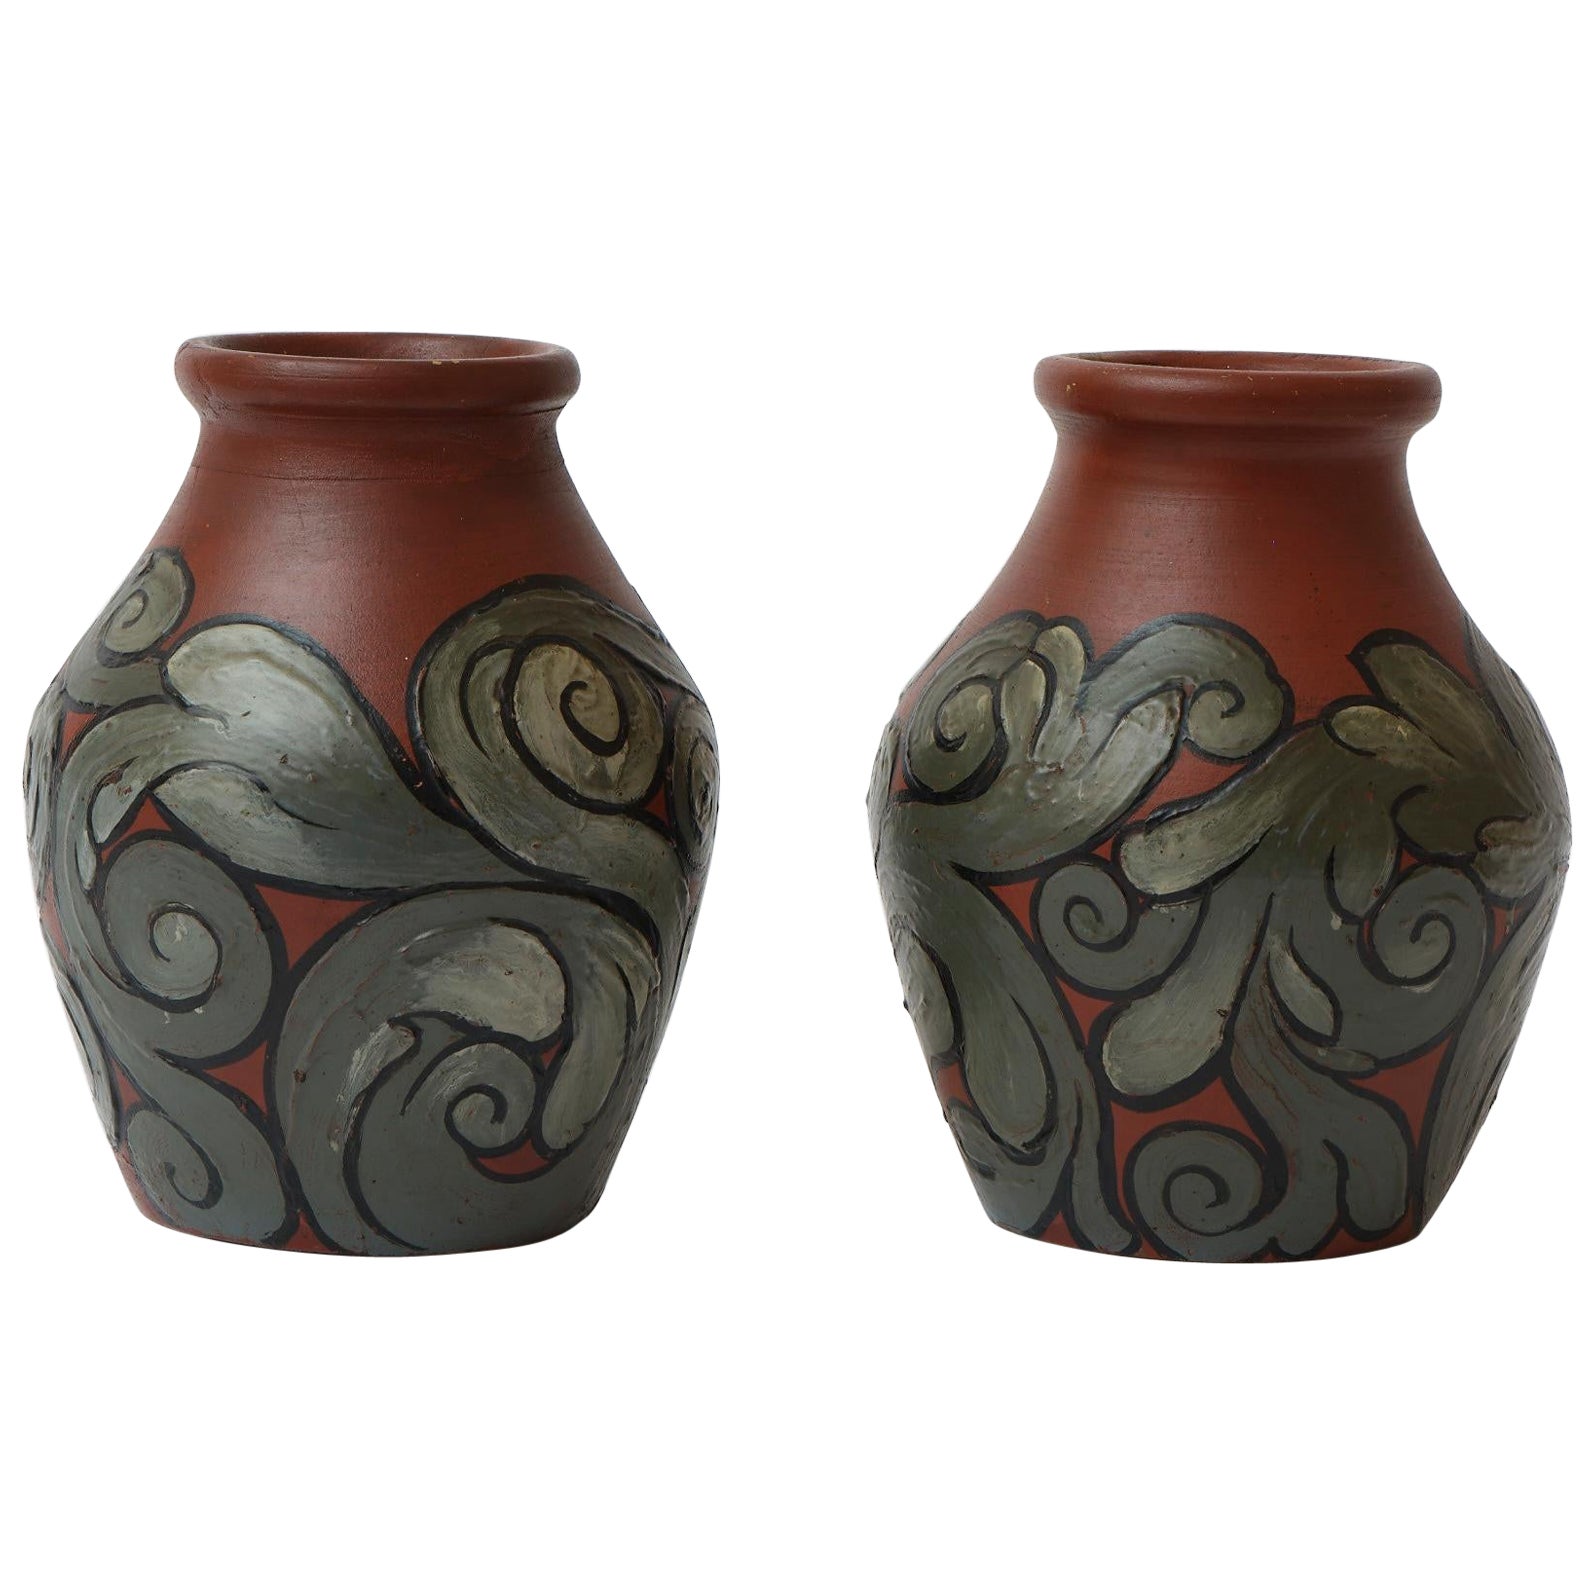 Pair of Danish hand made earthenware Art Nouveau style vases